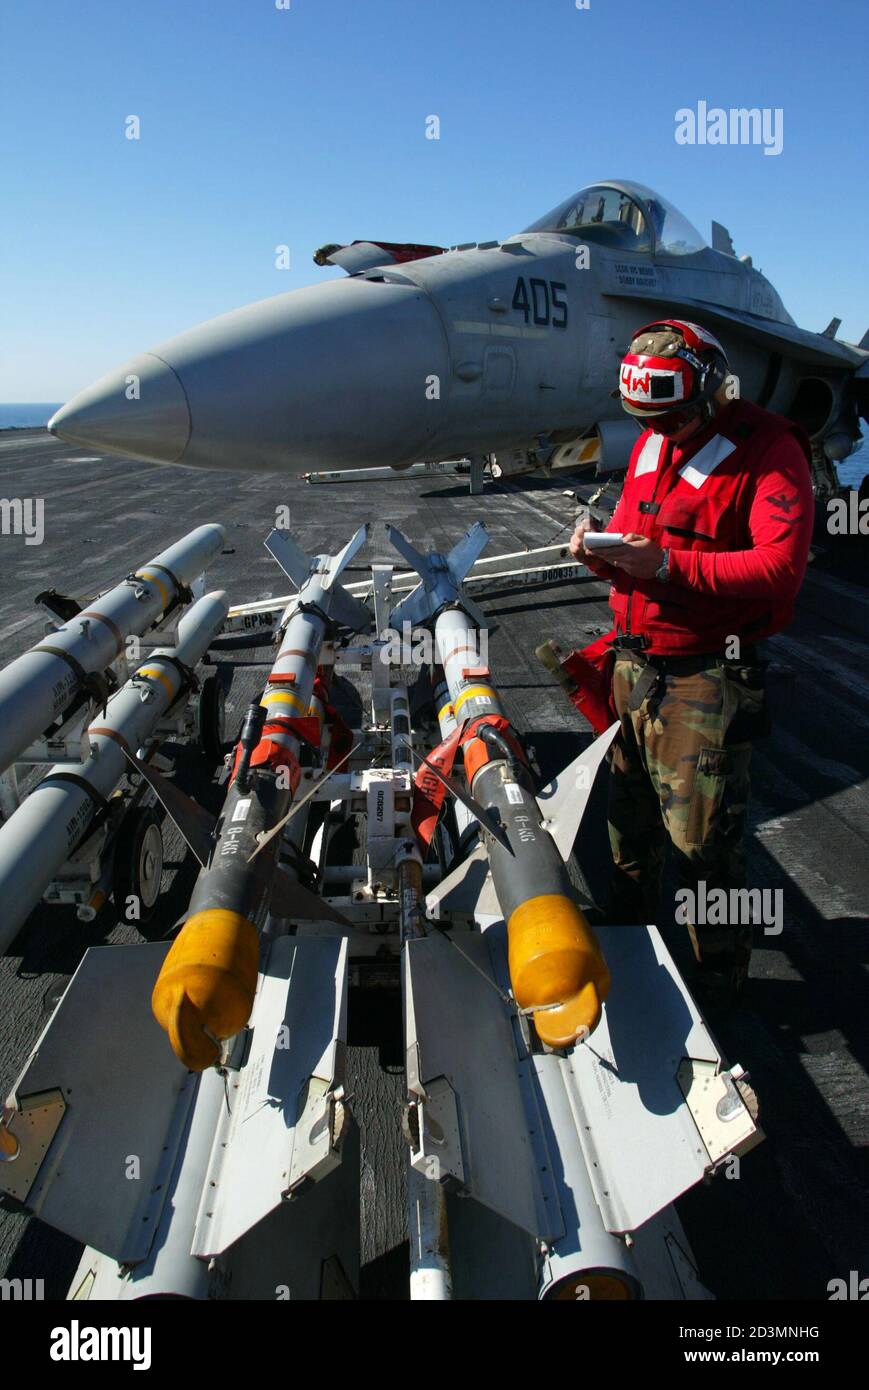 ORDNANCE WORKER JOTS DOWN SERIAL NUMBERS OF AIM-9 SIDEWINDER MISSILES ON BOARD THE USS ABRAHAM LINCOLN IN THE GULF. Stock Photo